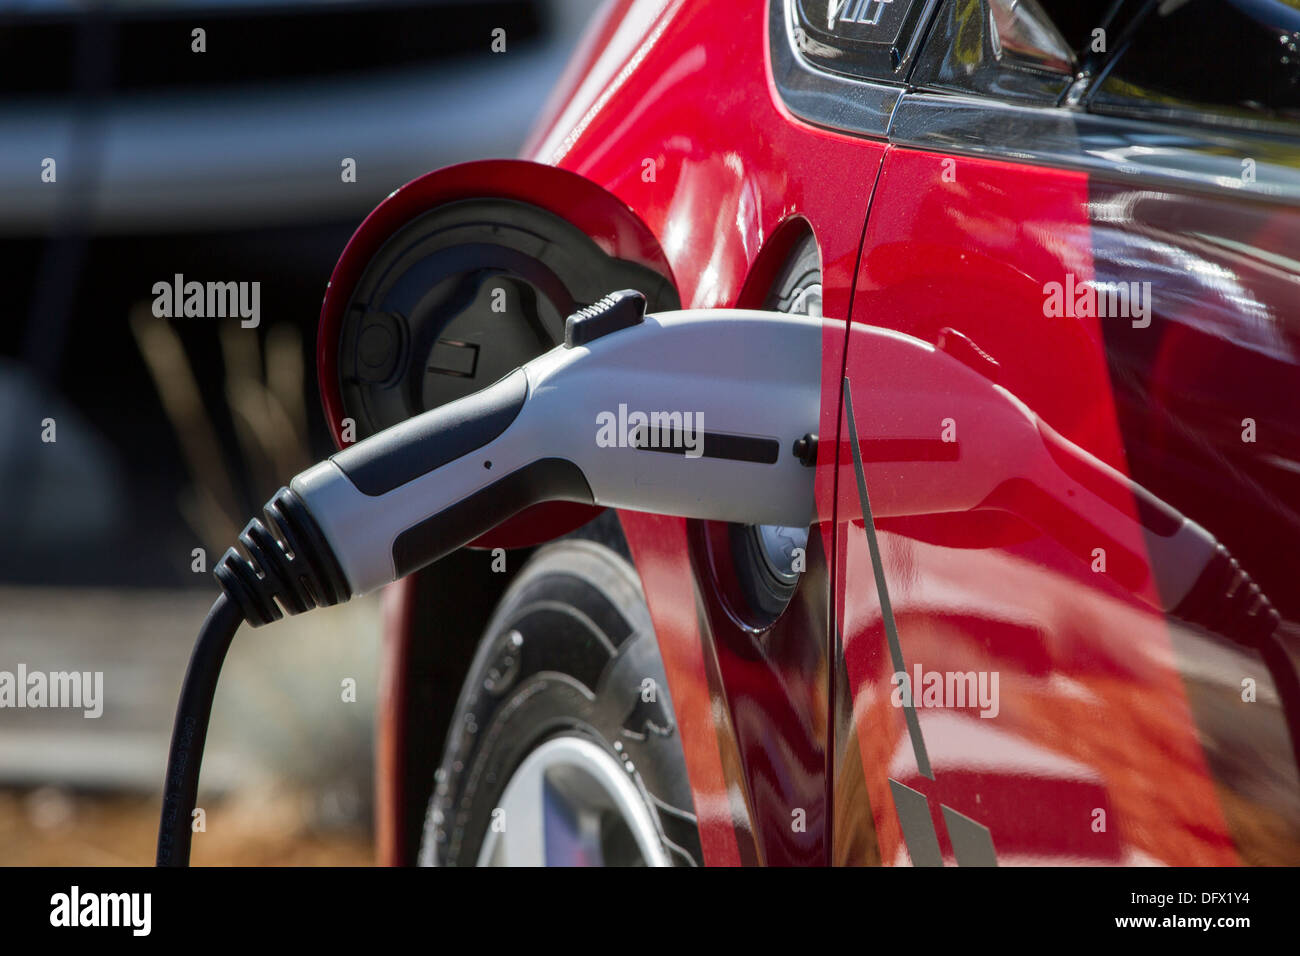 Red plug-in electric car with connector plugged into a charging station to charge its battery in a company parking lot Stock Photo